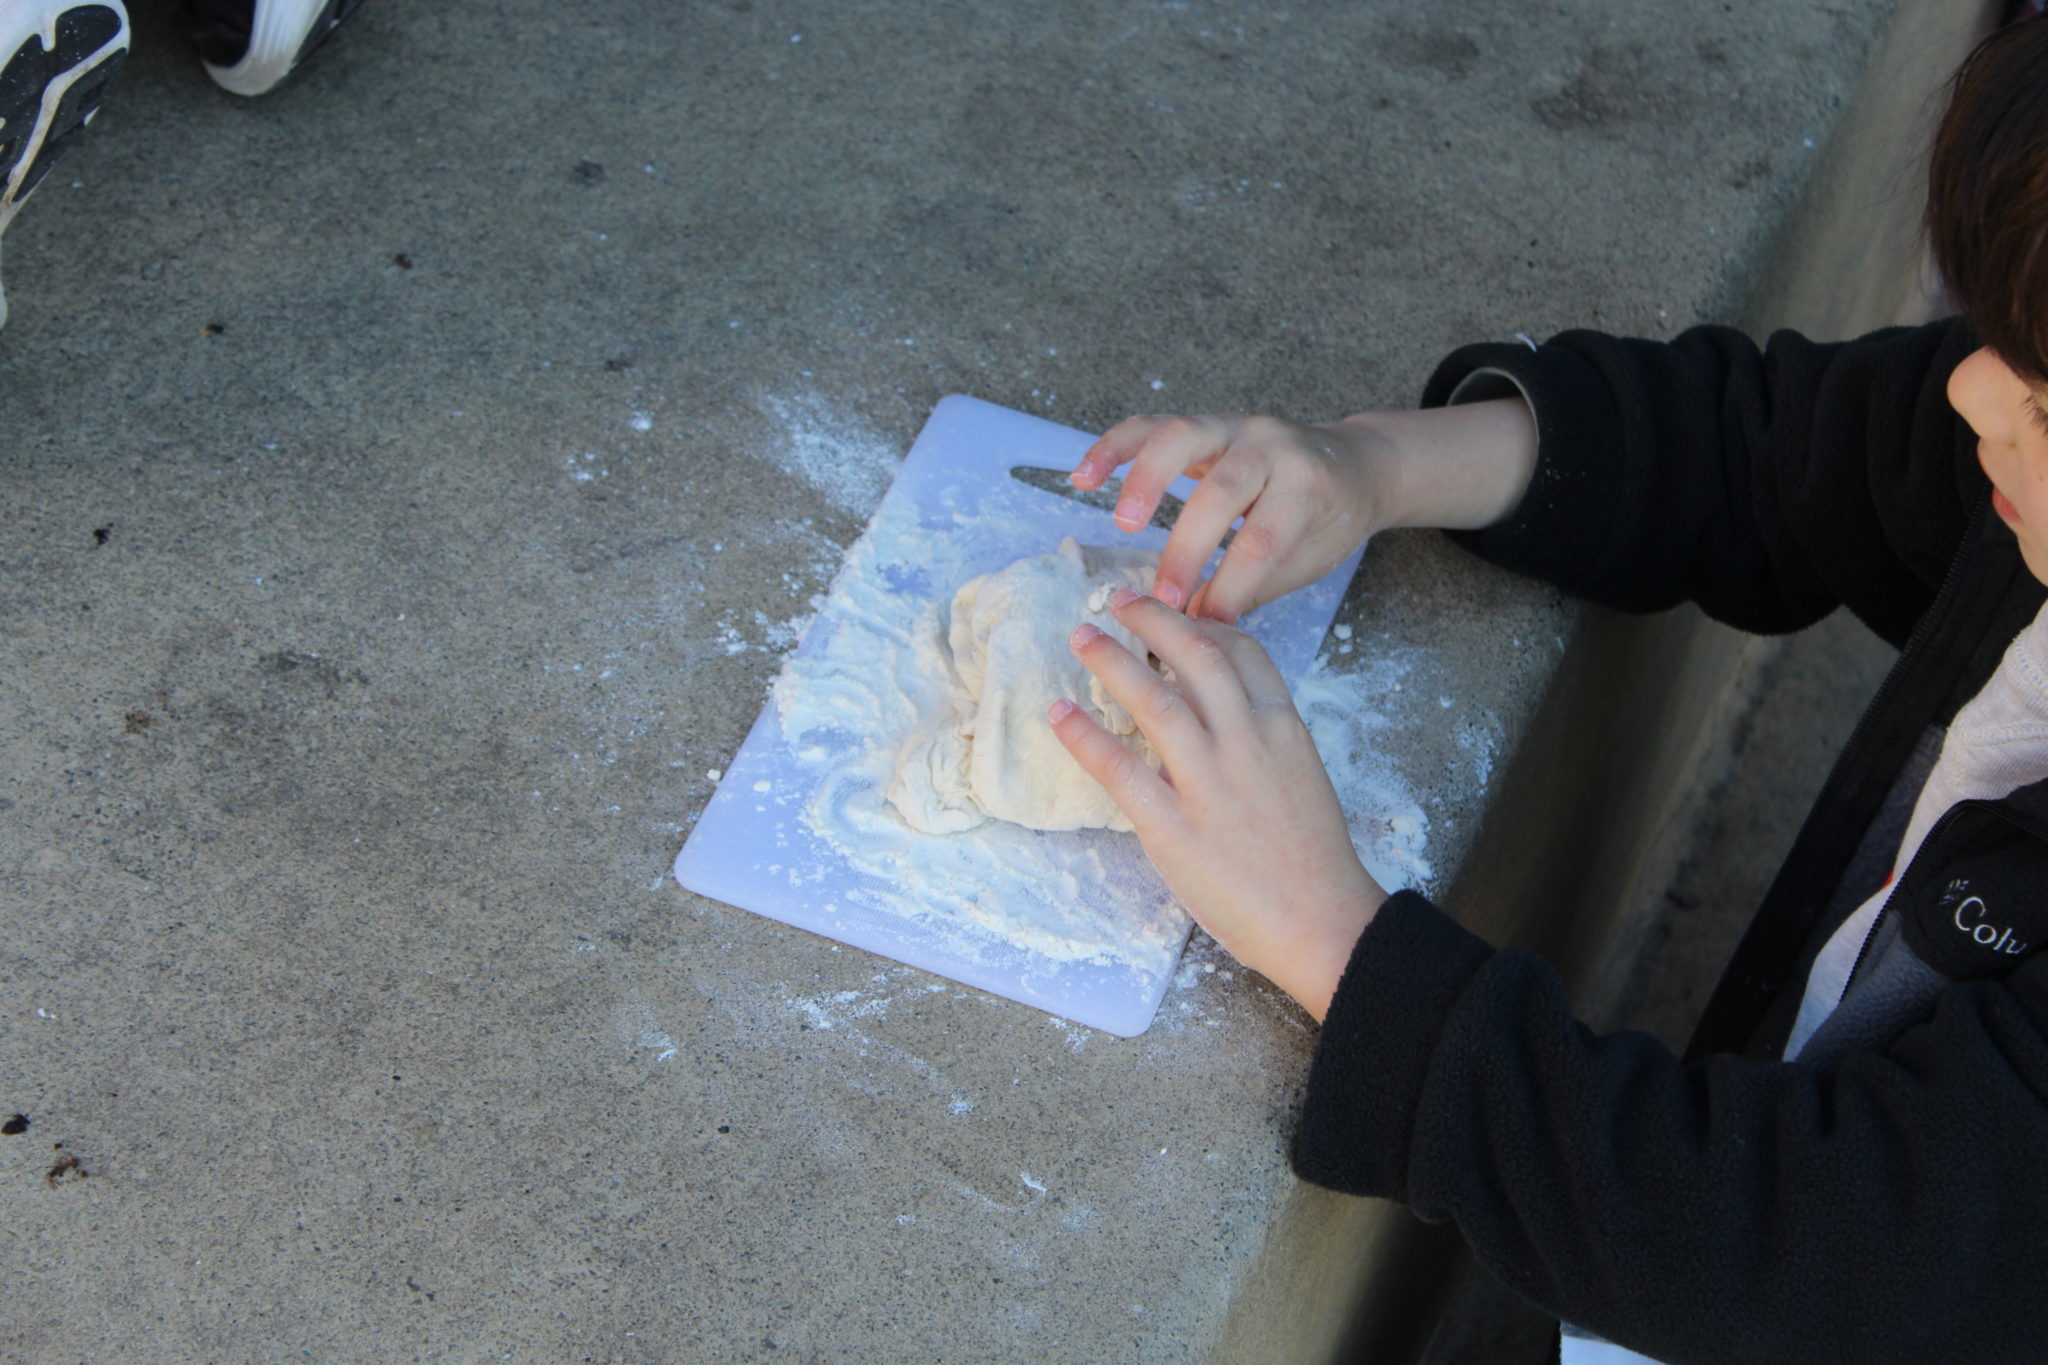 A child's hands kneading bread dough.